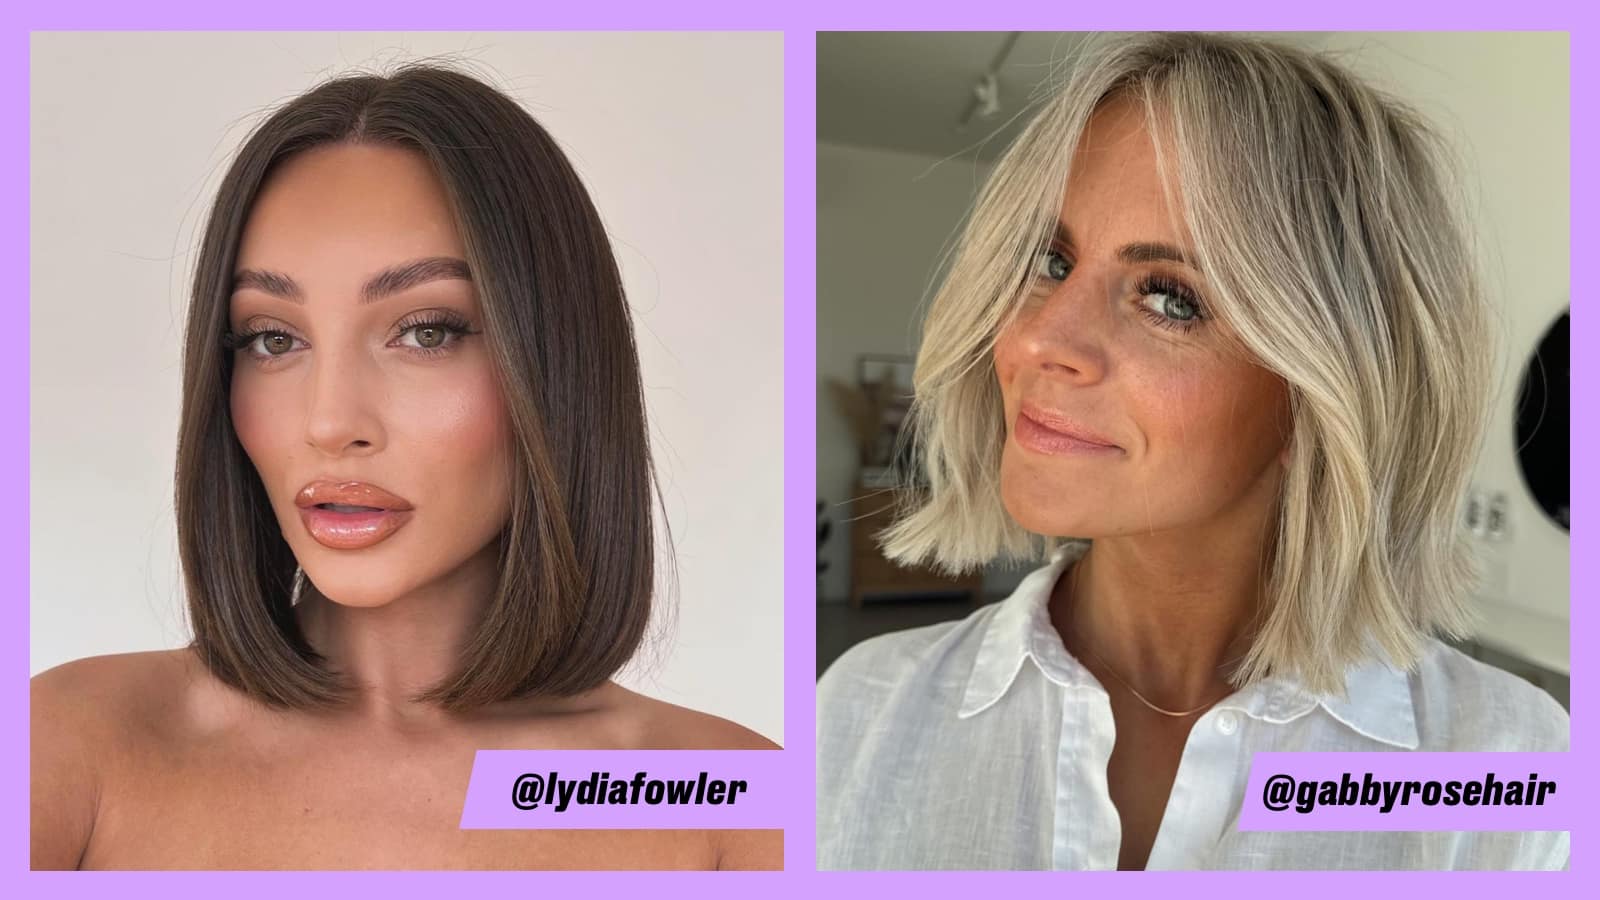 All time trendy short hair cuts for women, worth giving a try!